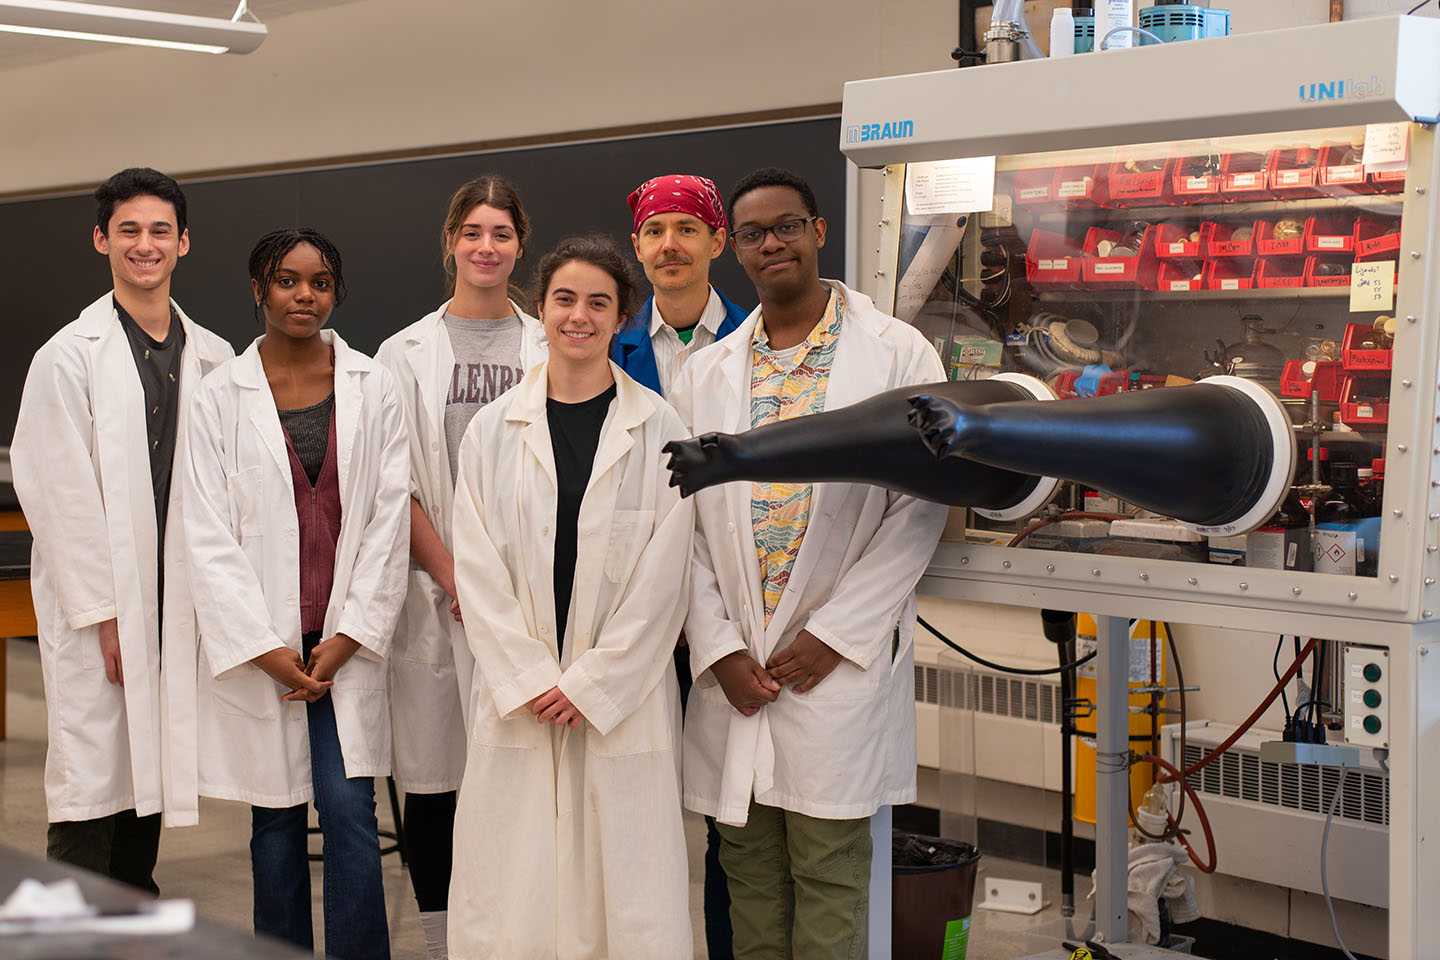 A college professor in a chemistry lab with a group of students wearing white lab coats next to a glove box